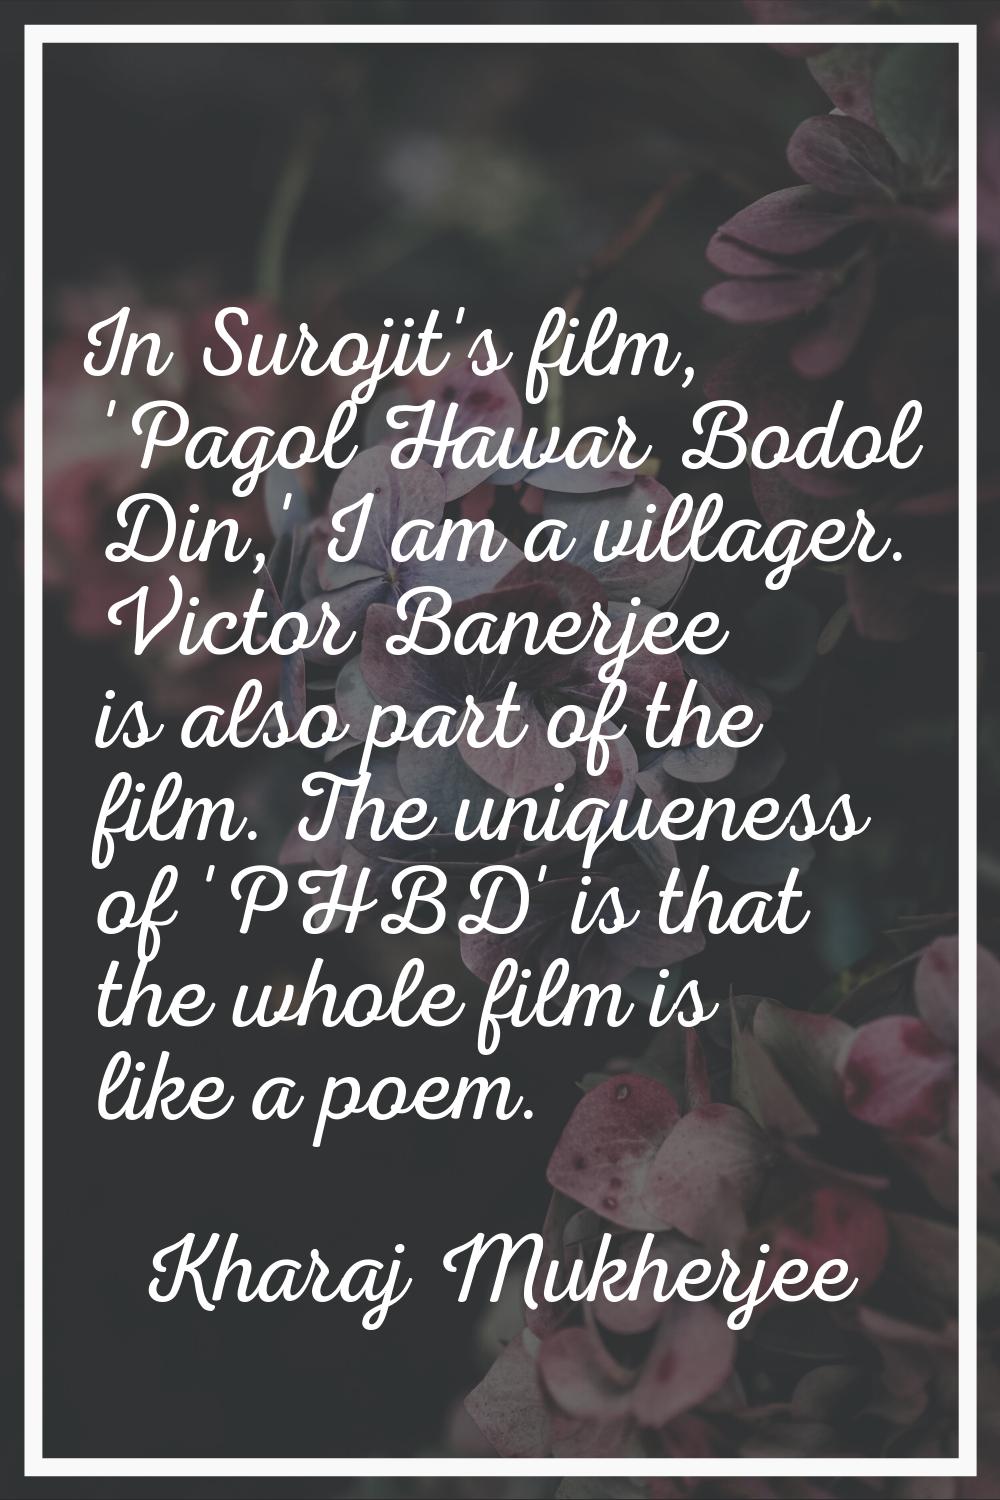 In Surojit's film, 'Pagol Hawar Bodol Din,' I am a villager. Victor Banerjee is also part of the fi